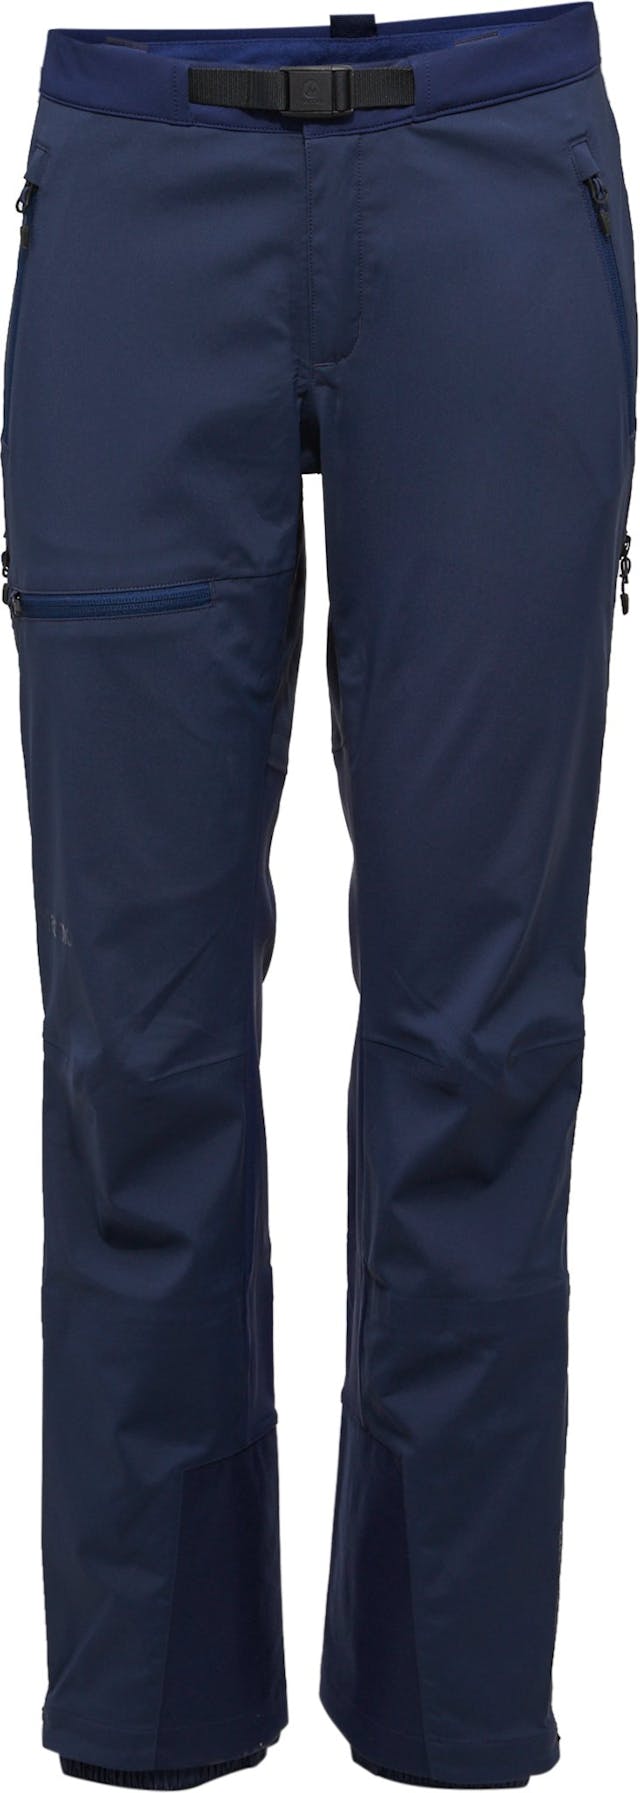 Product image for Rom GORE-TEX Pants - Women's